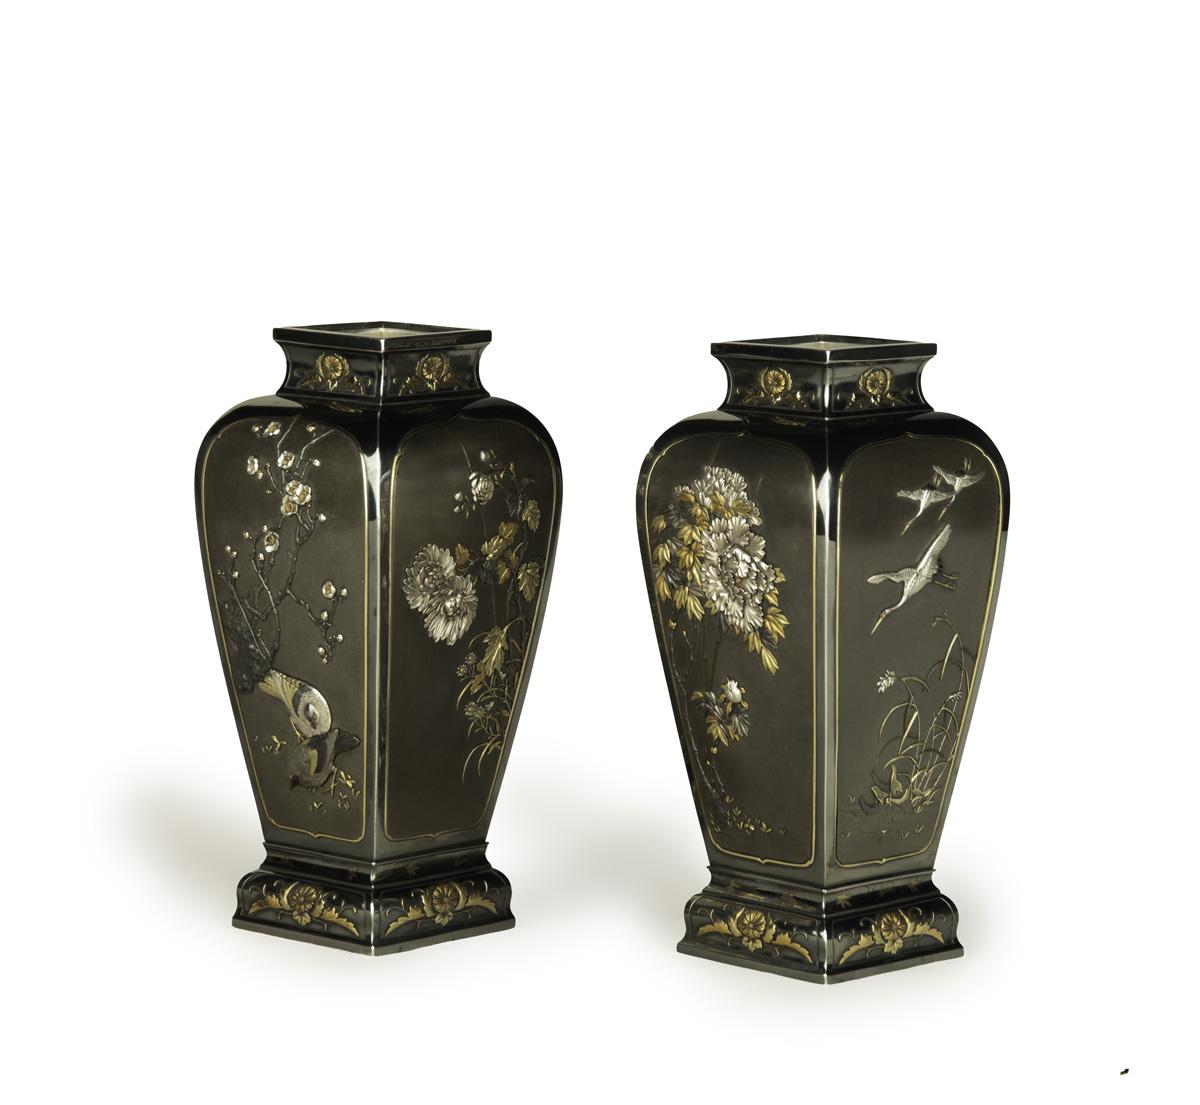 Exceptional Japanese Silver and Mixed Metal Vases